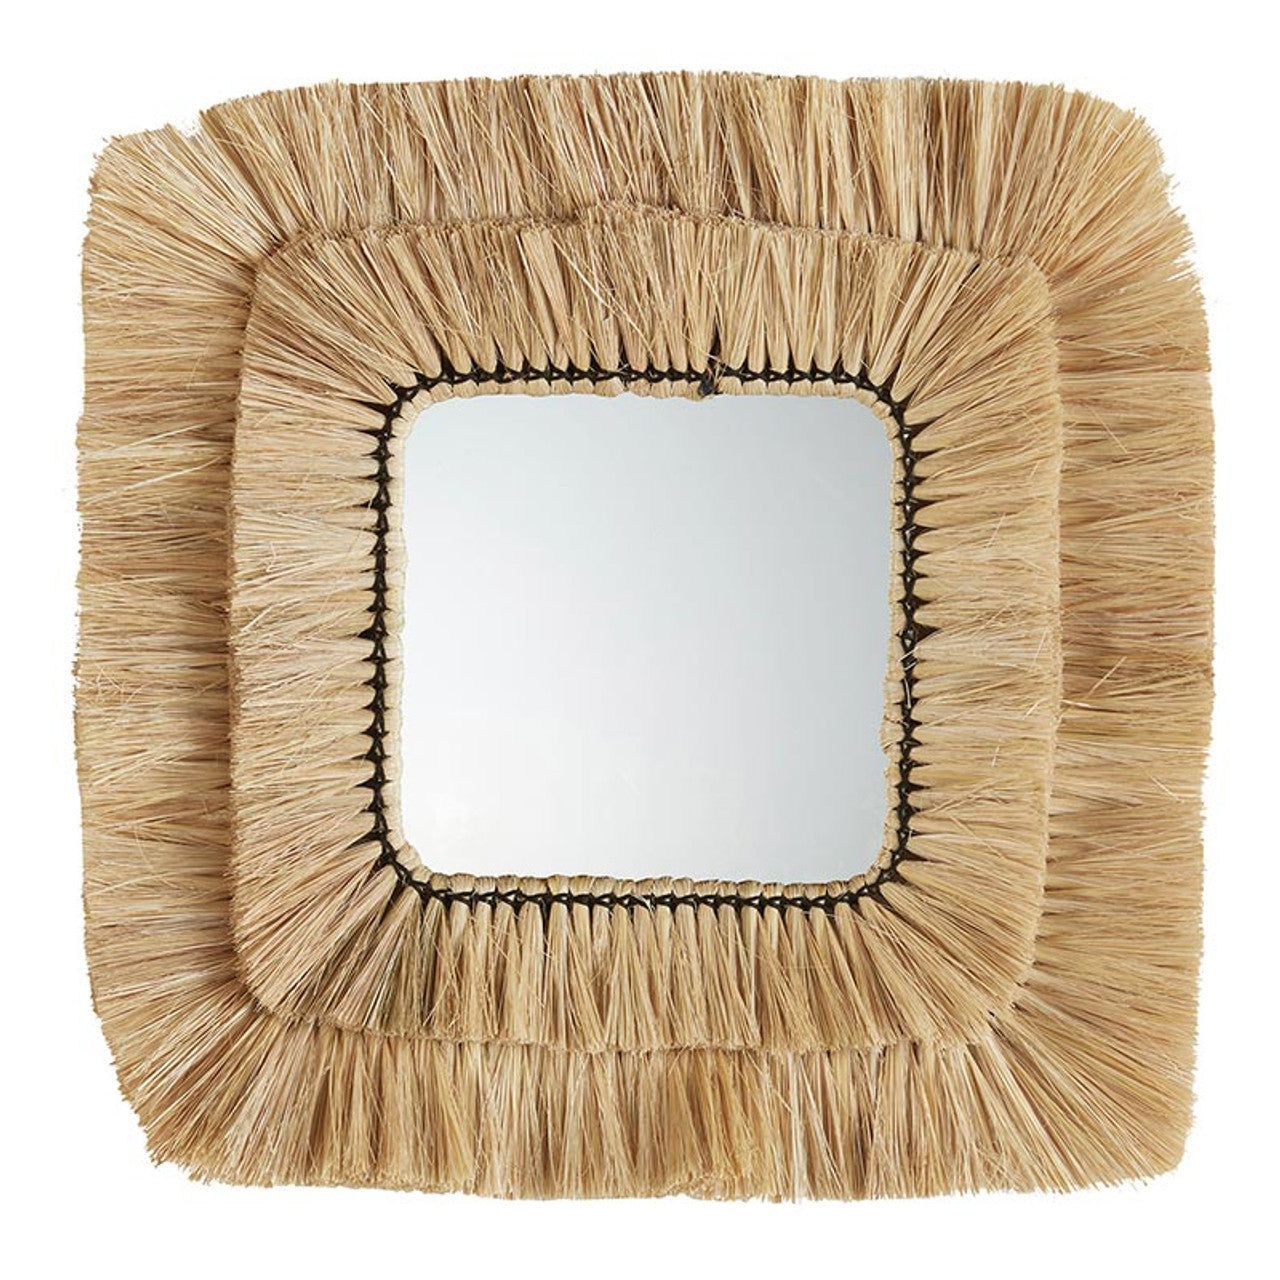 Seagrass Mirror - Large